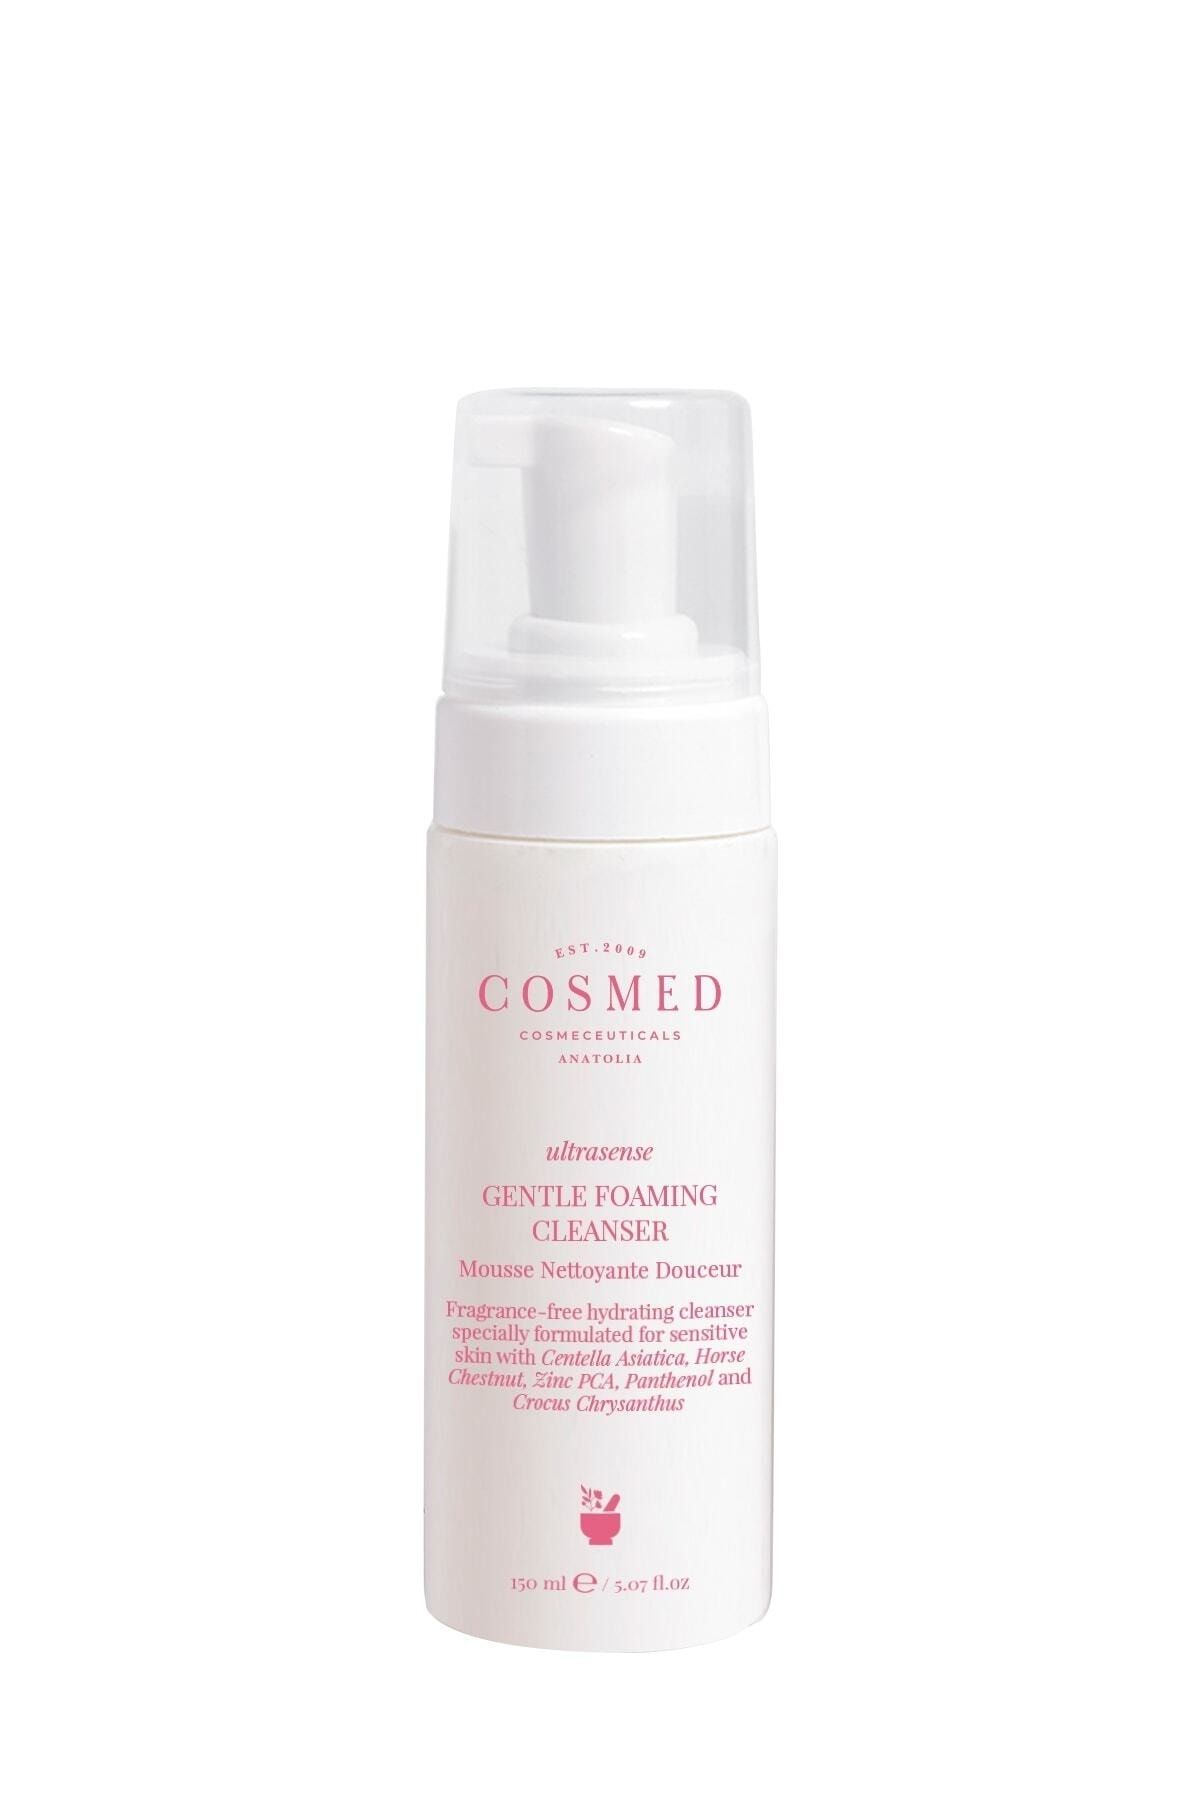 Gentle foaming cleanser. Cosmed косметика Anatolia. Physio Radiance gentle Foaming Cleanser. Космед. Gentle Foam транскрипция.